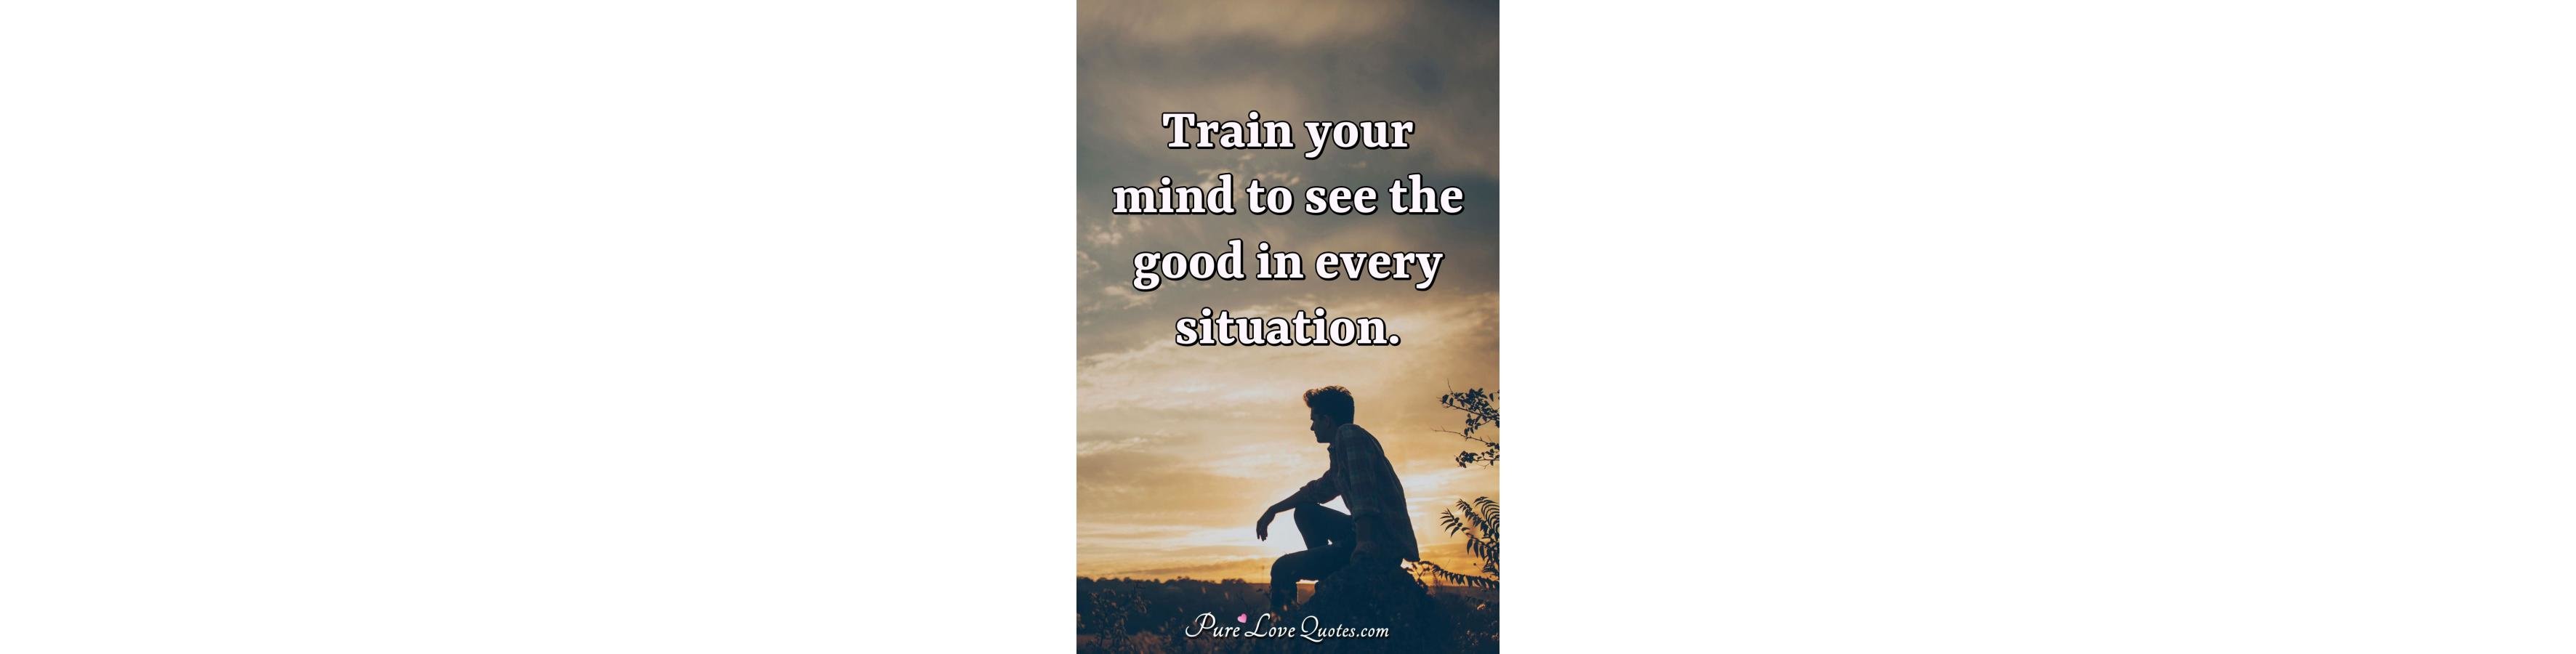 Train your mind to see the good in every situation 